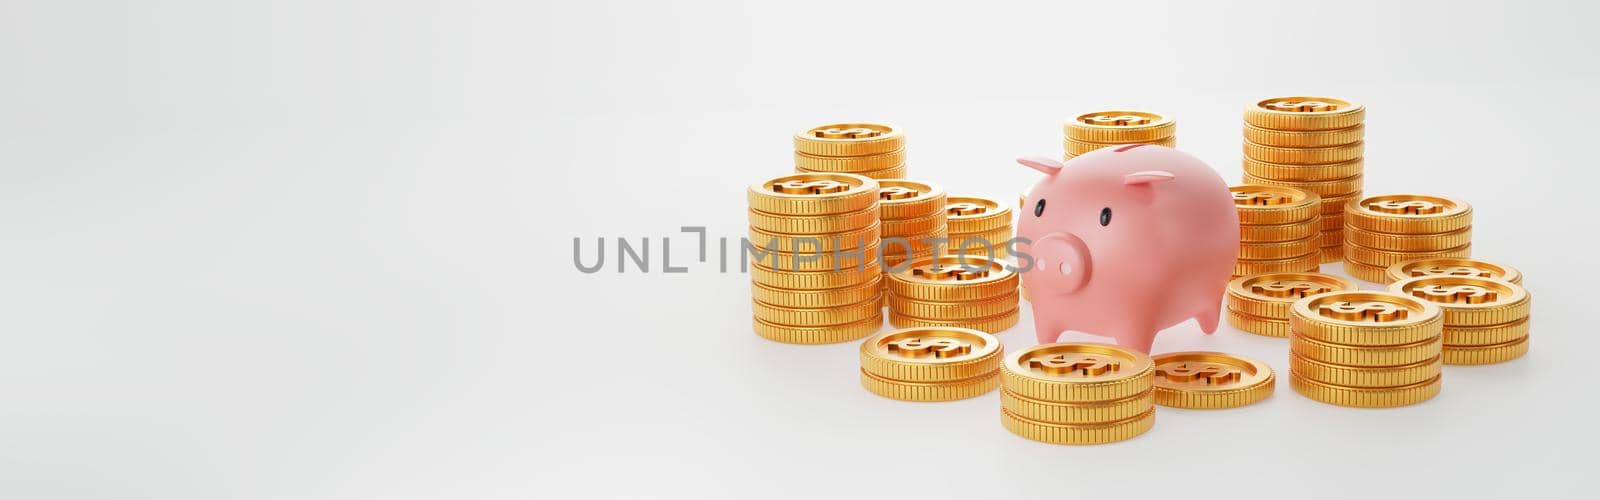 Piggy bank with gold coin on isolated white background. Panorama wide angle cover banner with copy space on left side. Money saving and business economic investment concept. 3D illustration rendering by MiniStocker